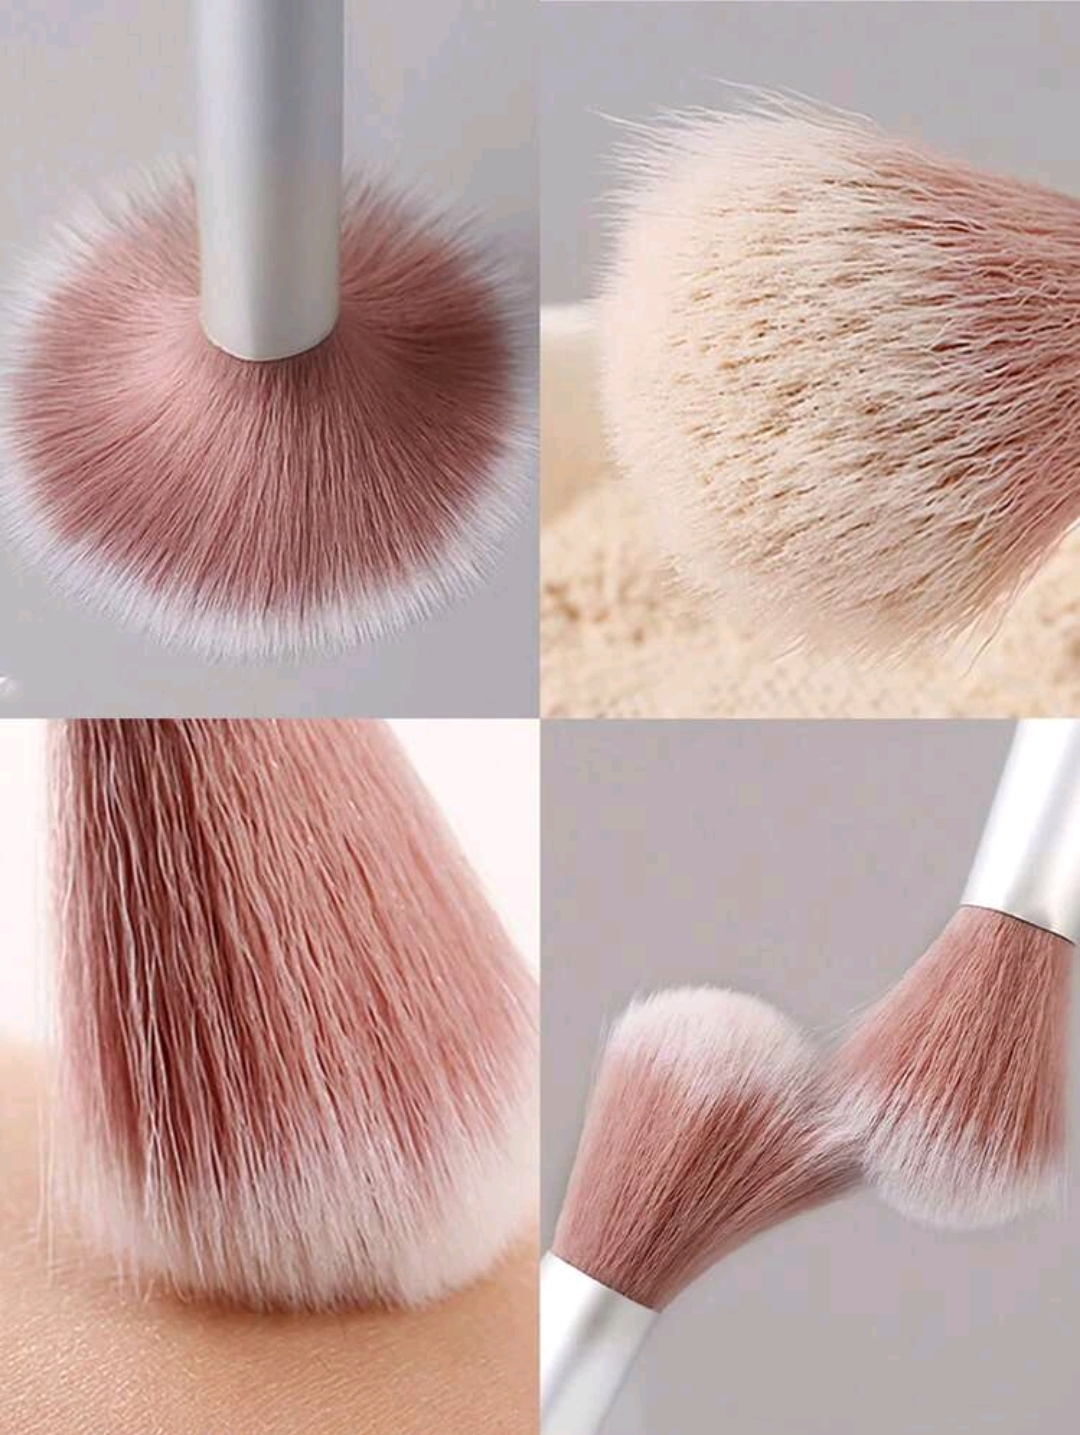 Reusable And Portable Soft Fluffy Single Powder Brush For Professional Makeup Application - Ideal For Novice And Artist. This Brush Is Suitable For Liquid, Cream And Powder And Can Be Used For Polishing, Blending And Face Brushing. Suitable For Applying C